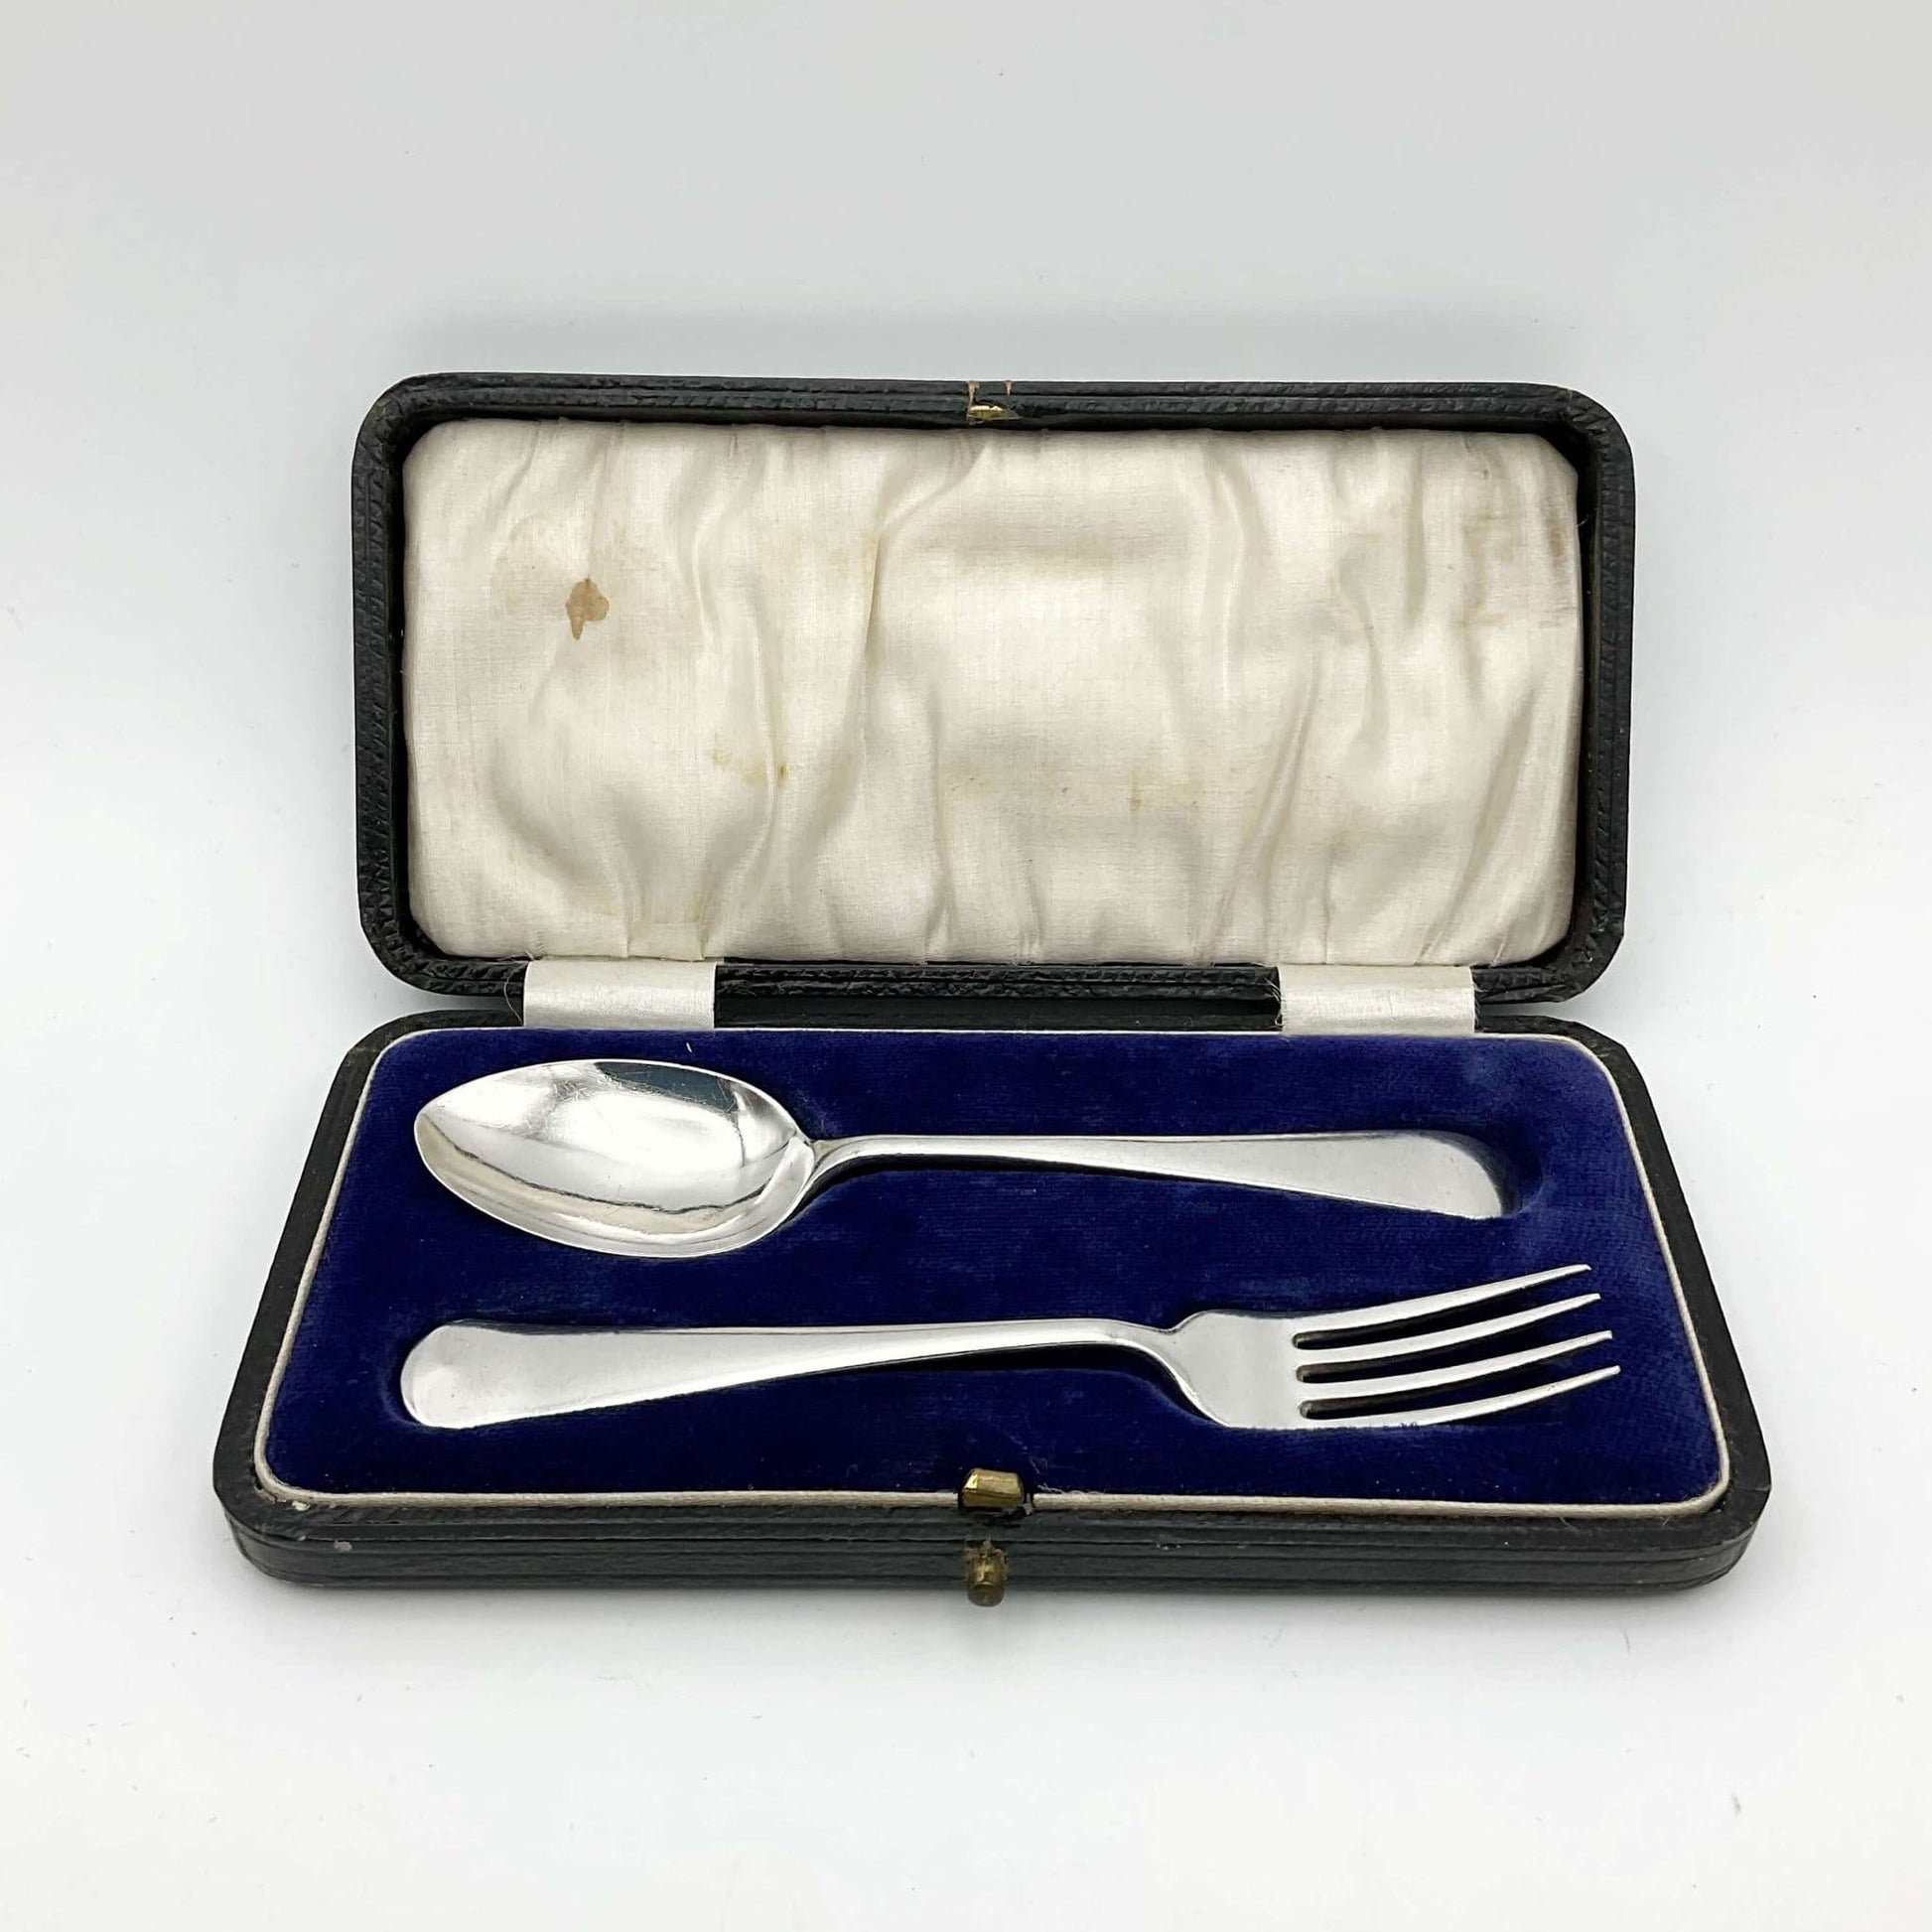 Childs Silver Fork and Spoon Set in a presentation box. A perfect gift for a new baby, Christening or baptism.